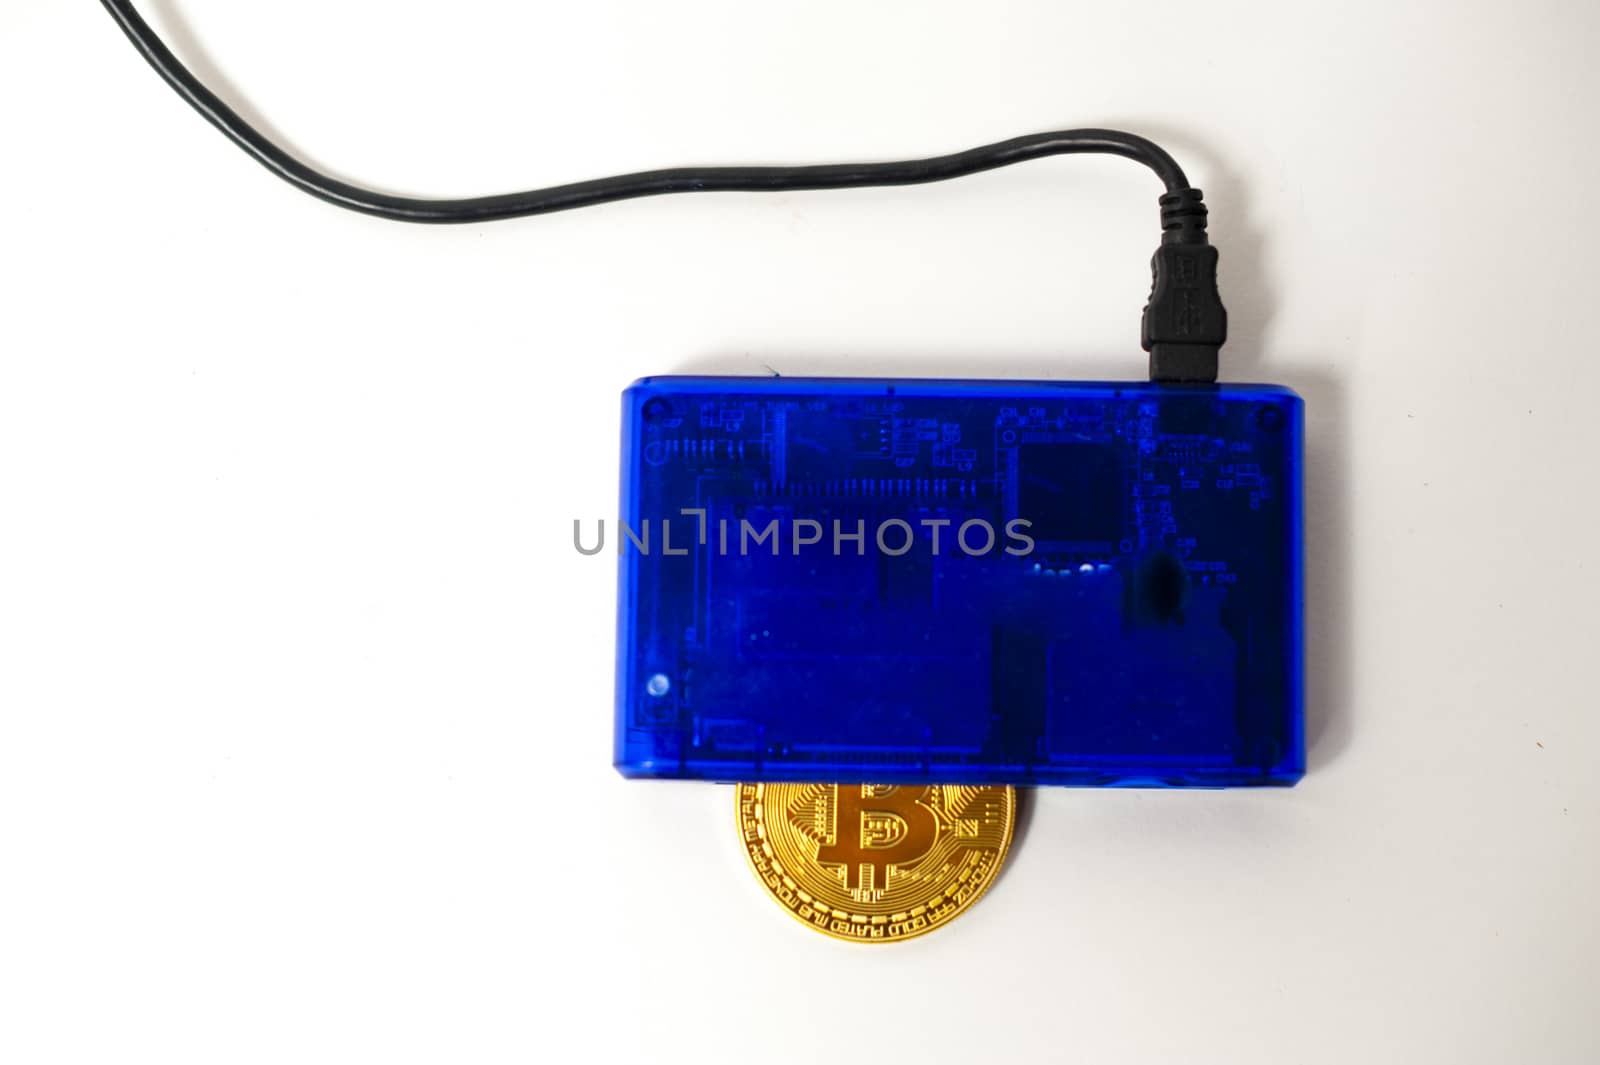 bitcoin electronic coin inside a digital card reader, white background